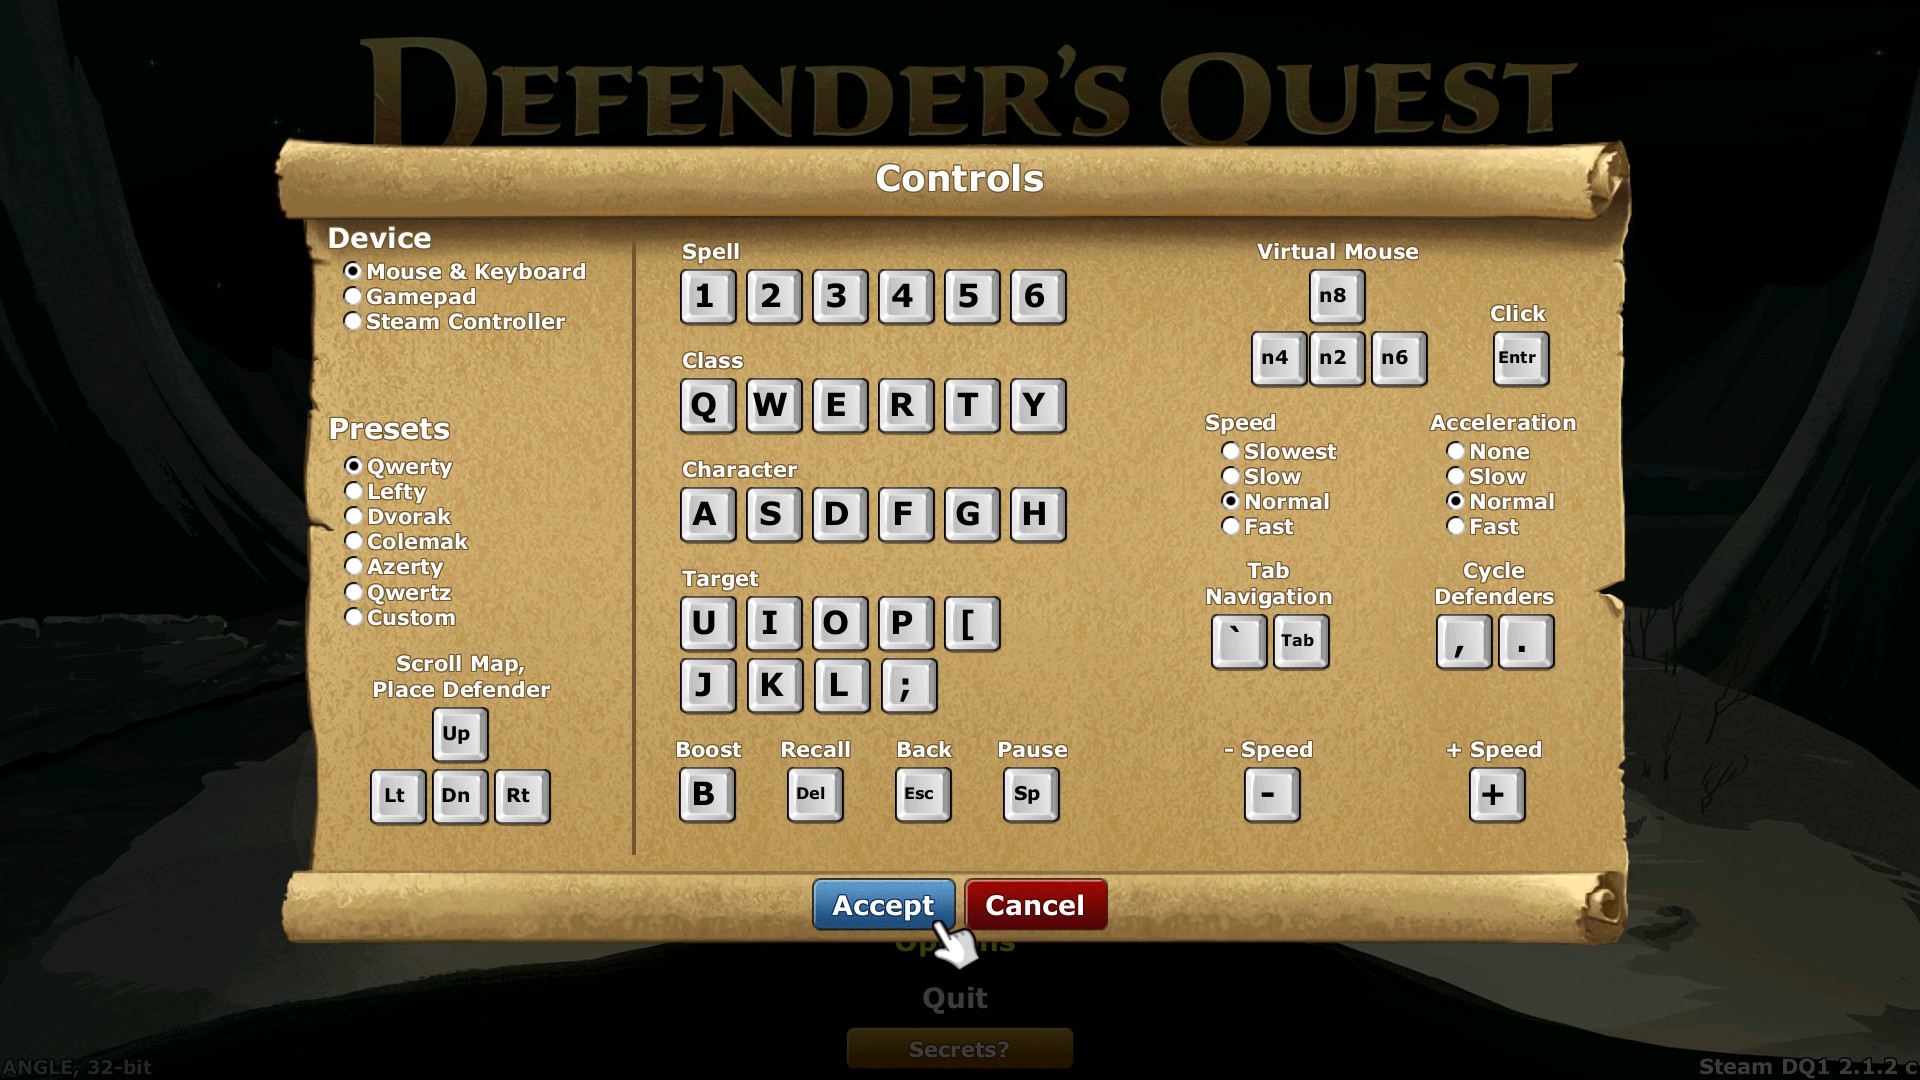 Keyboard & Mouse controls configuration screen